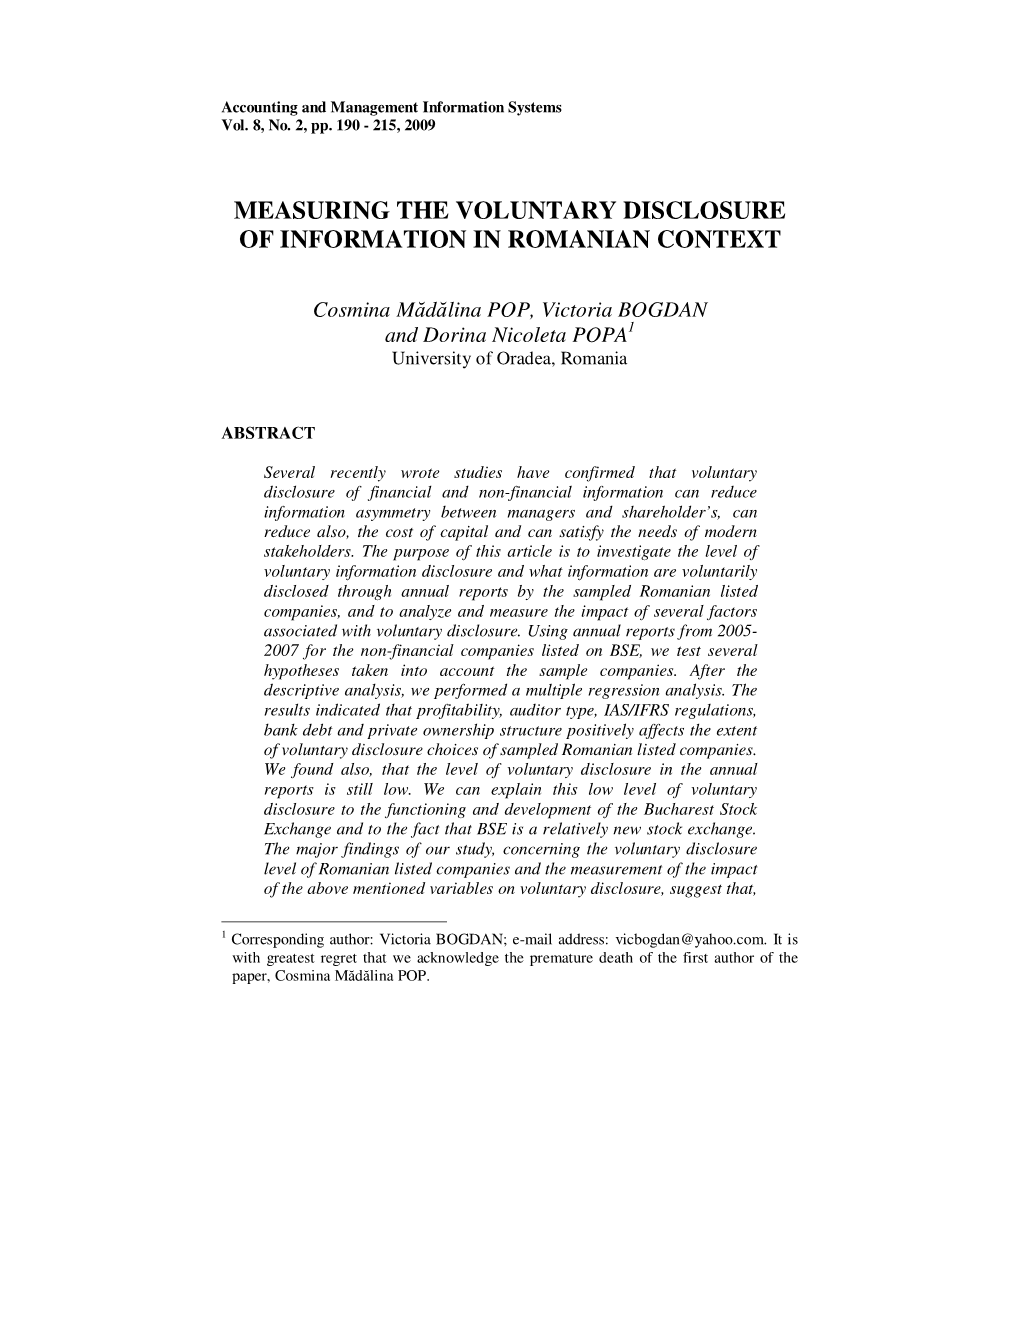 Measuring the Voluntary Disclosure of Information in Romanian Context